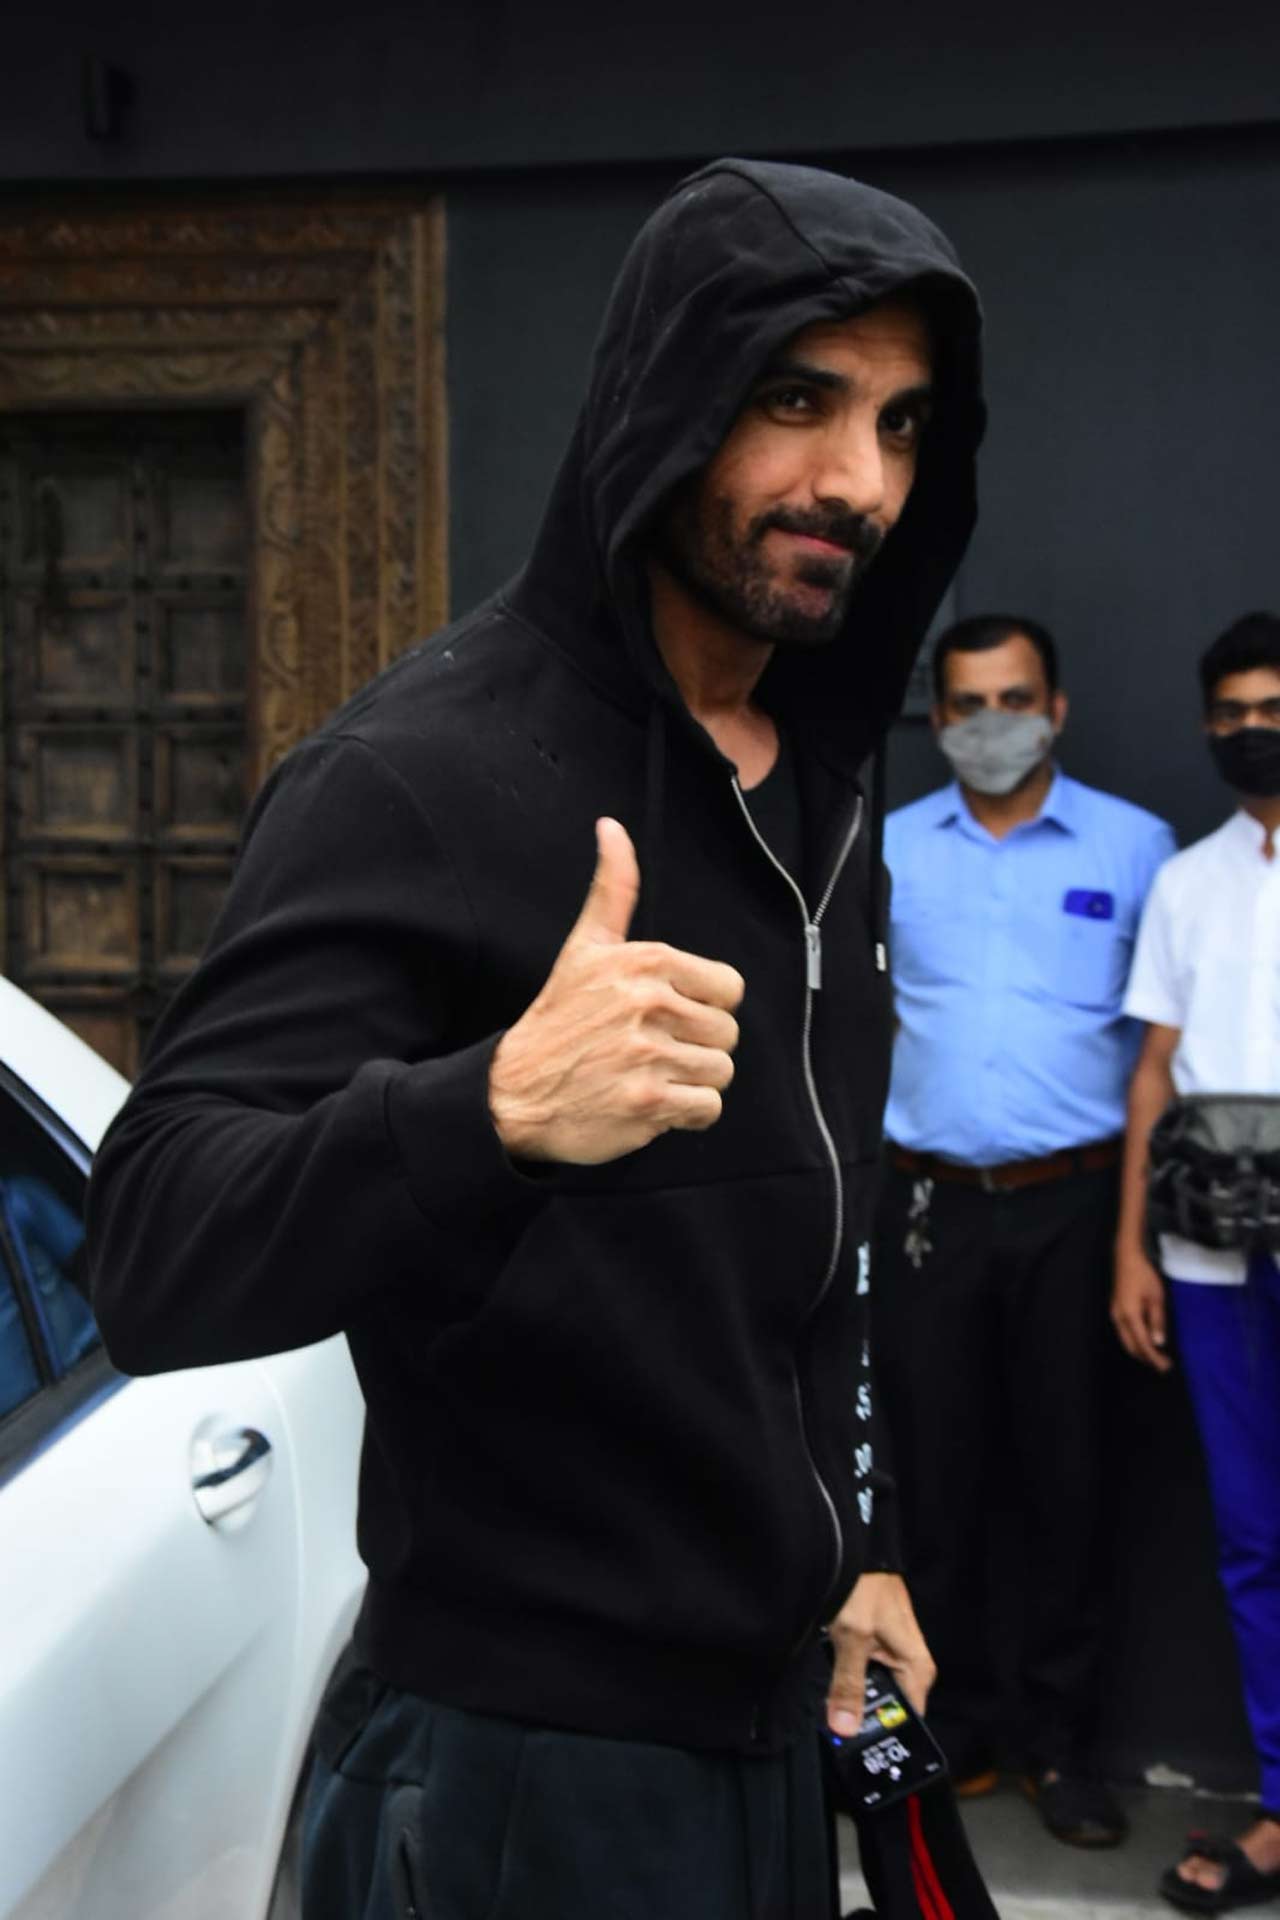 John Abraham was snapped posing for the shutterbugs near his Bandra gym. On the professional front, John Abraham has Satyameva Jayate 2 as his next release, which also stars Divya Khosla Kumar.